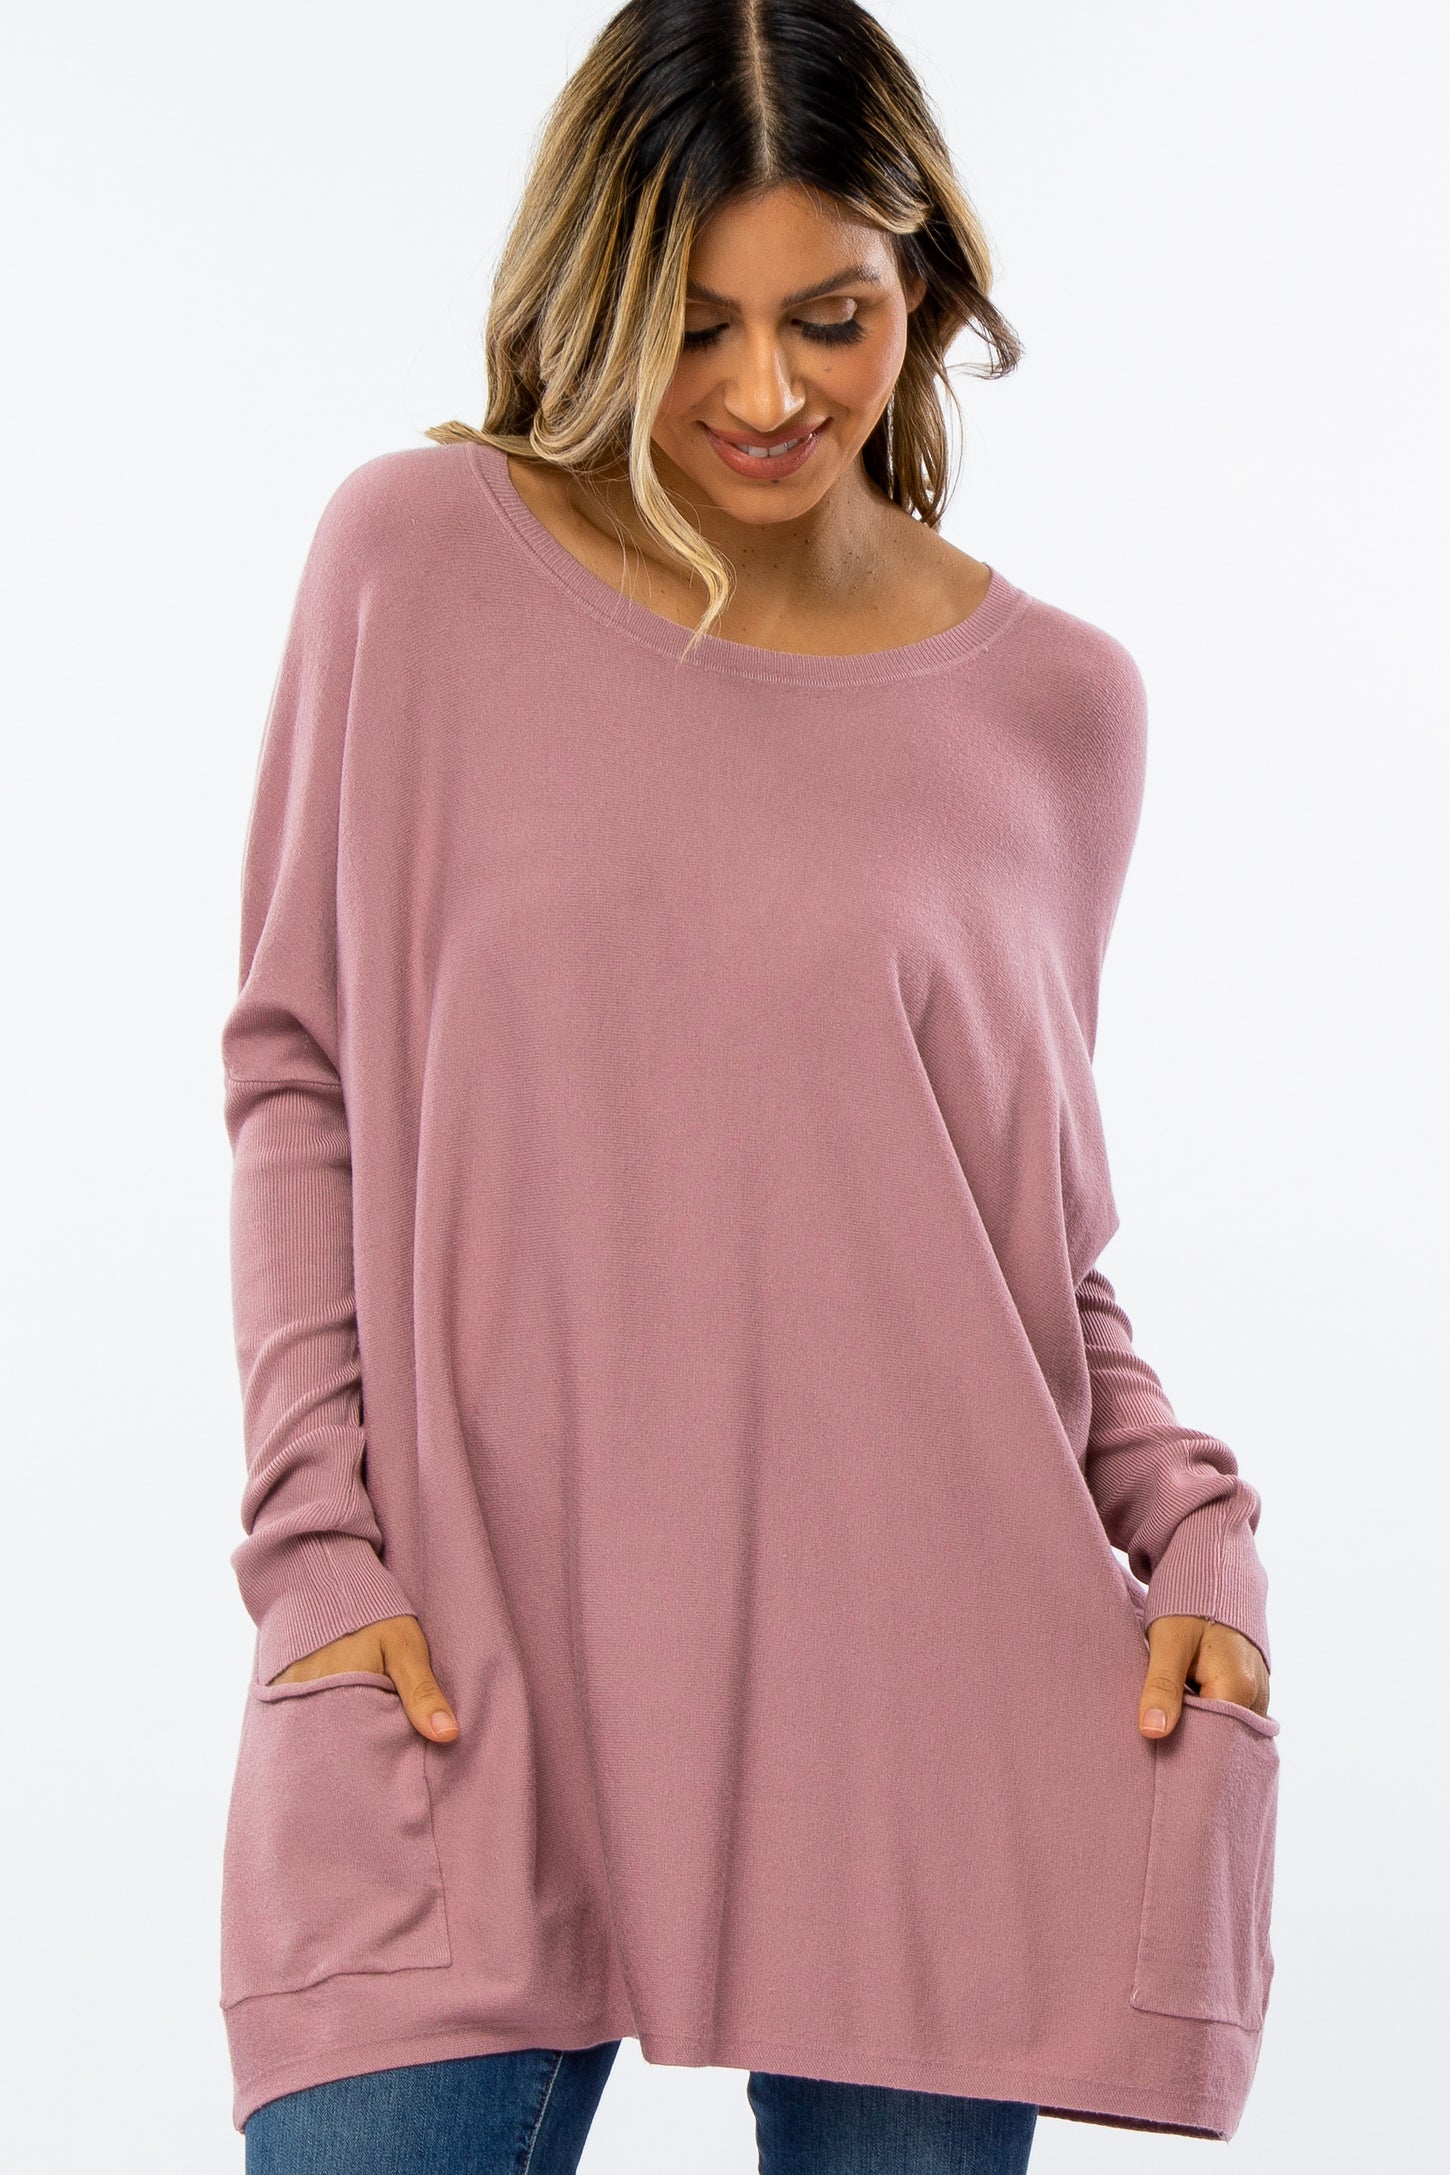 Lavender Pocketed Dolman Sleeve Maternity Top